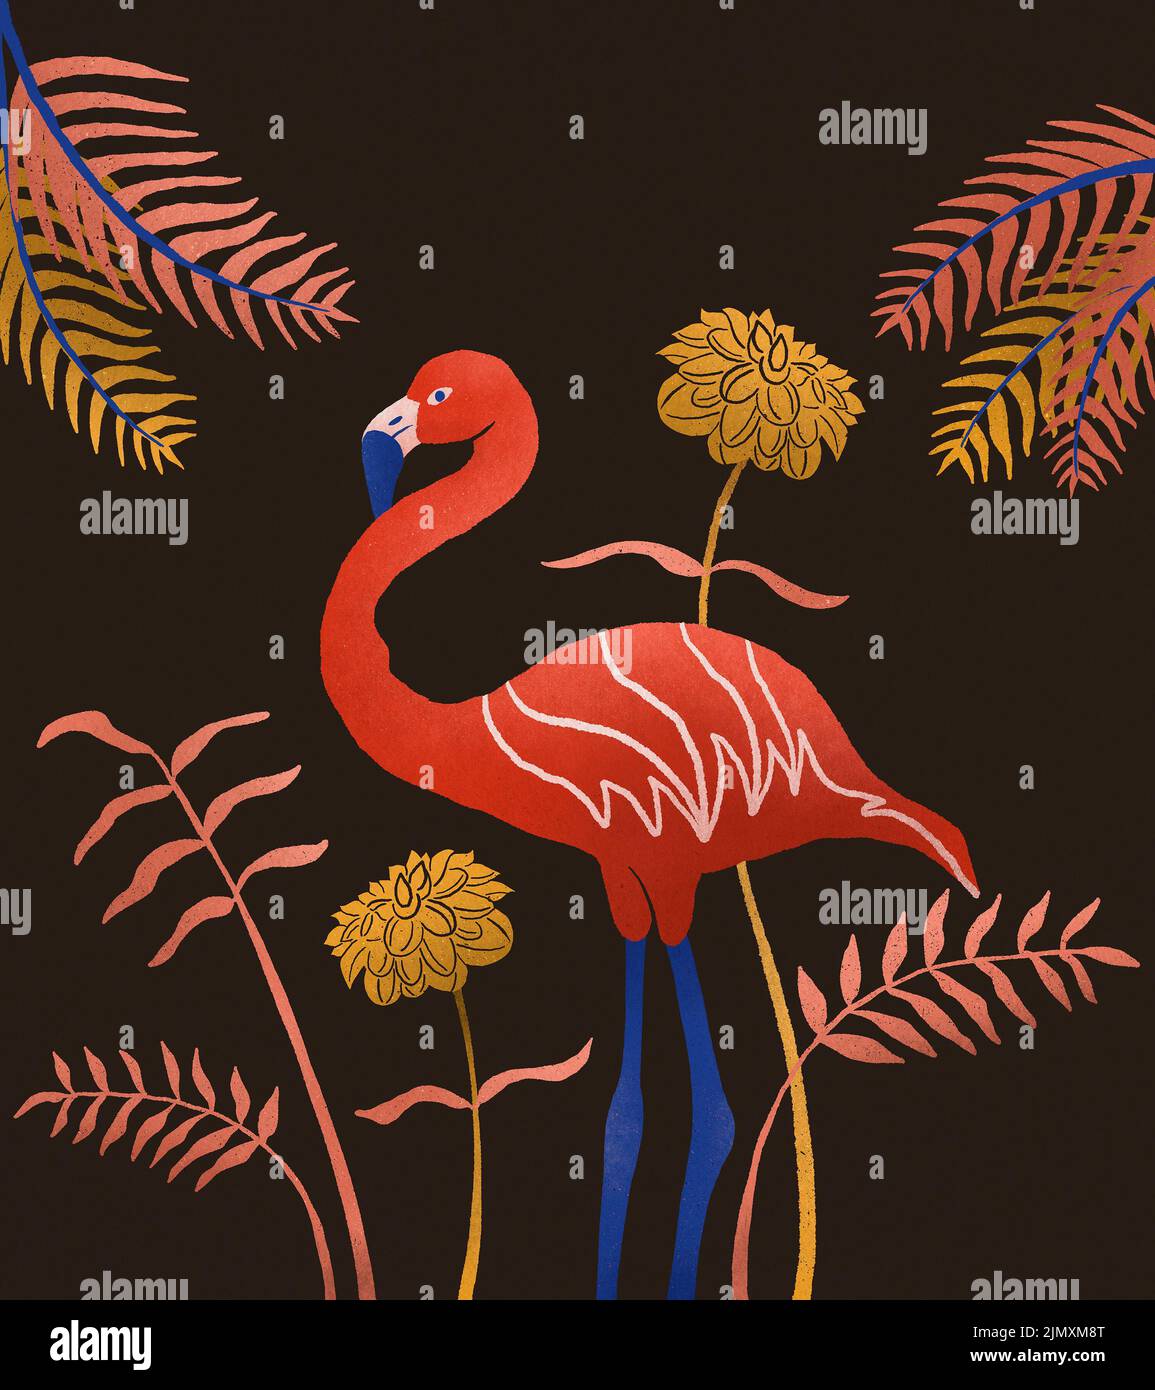 Tropical theme American Flamingo bird digital art illustration with dark background. Hot pink or red color bird motif. Floral and Texture design Stock Photo